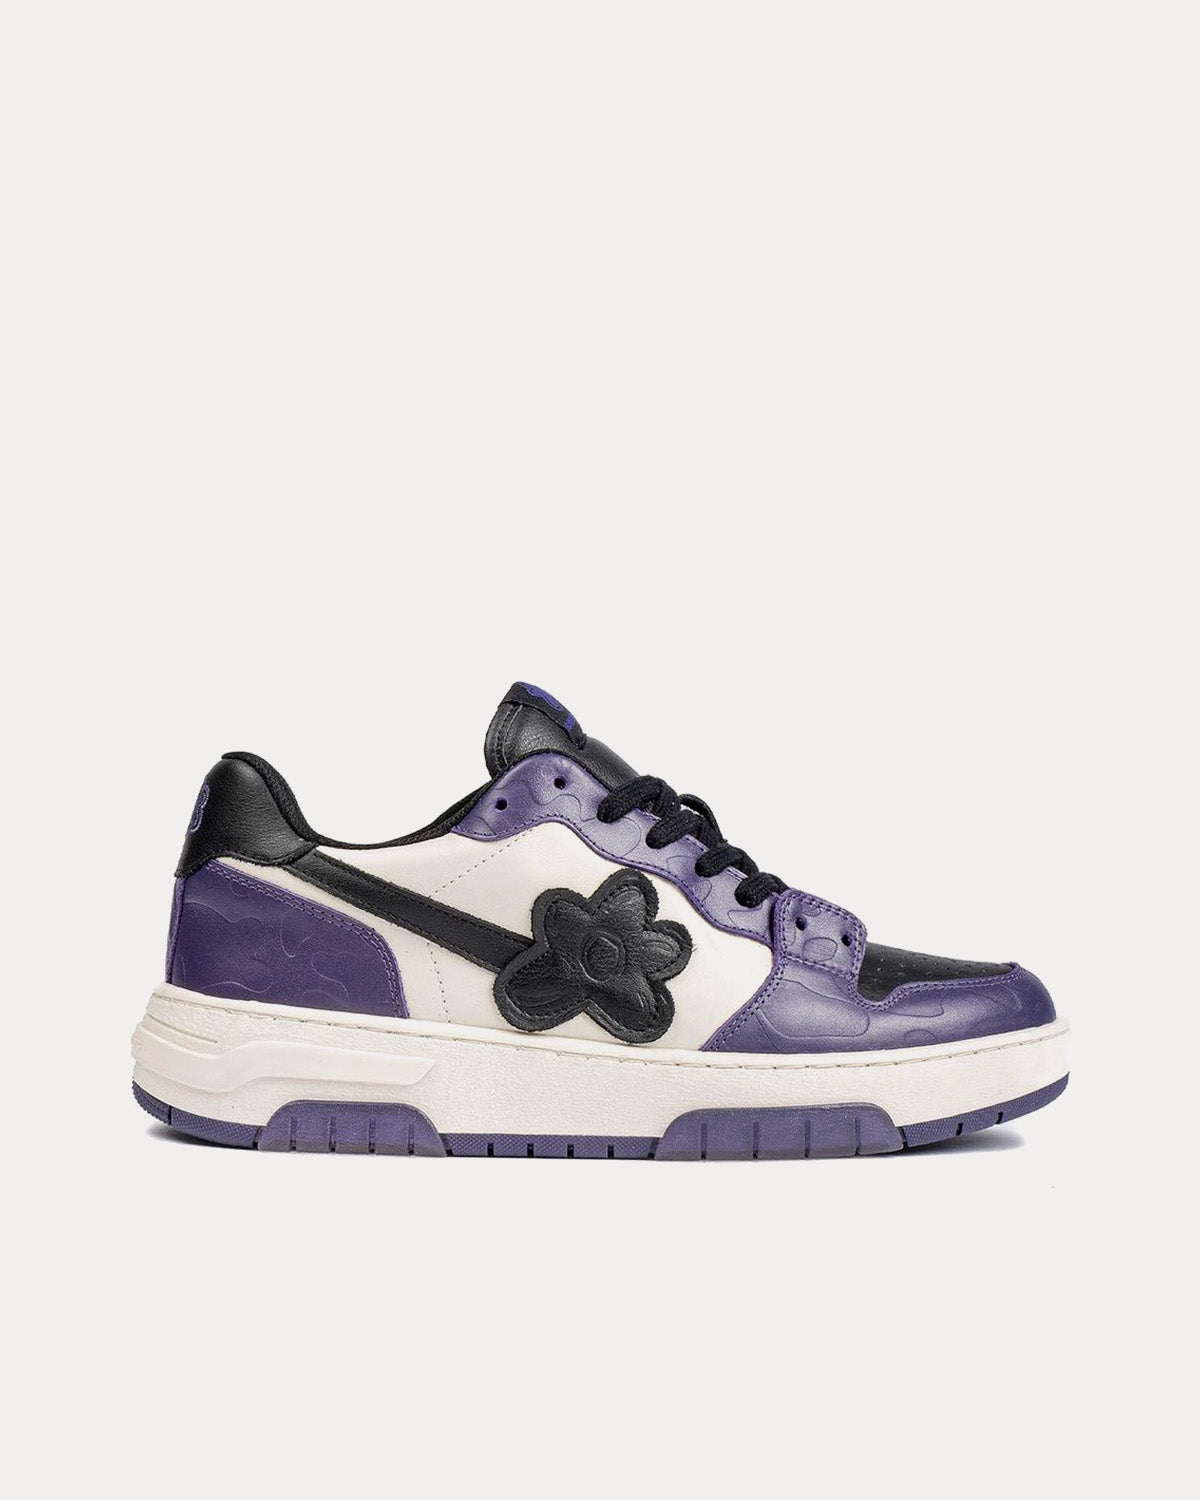 Flower Instincts - Magic Ball Purple / White / Black Low Top Sneakers